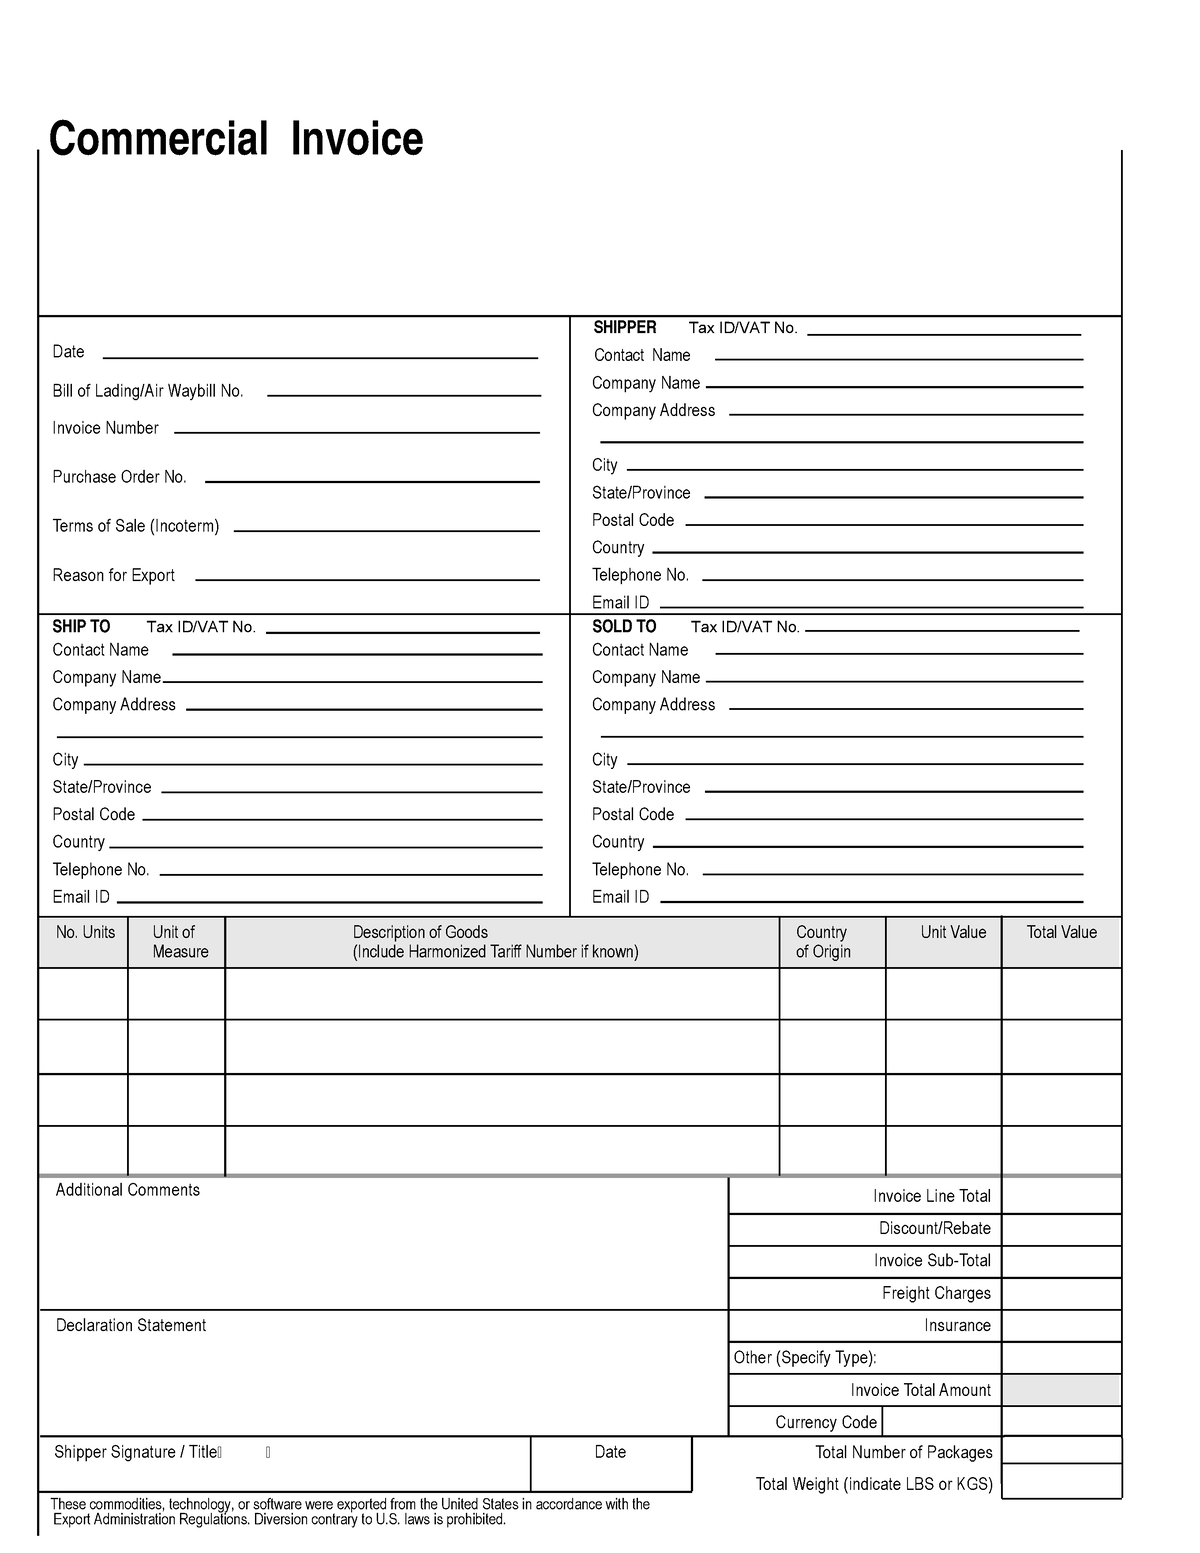 commercial-accounting-prorgression-invoices-date-bill-of-lading-air